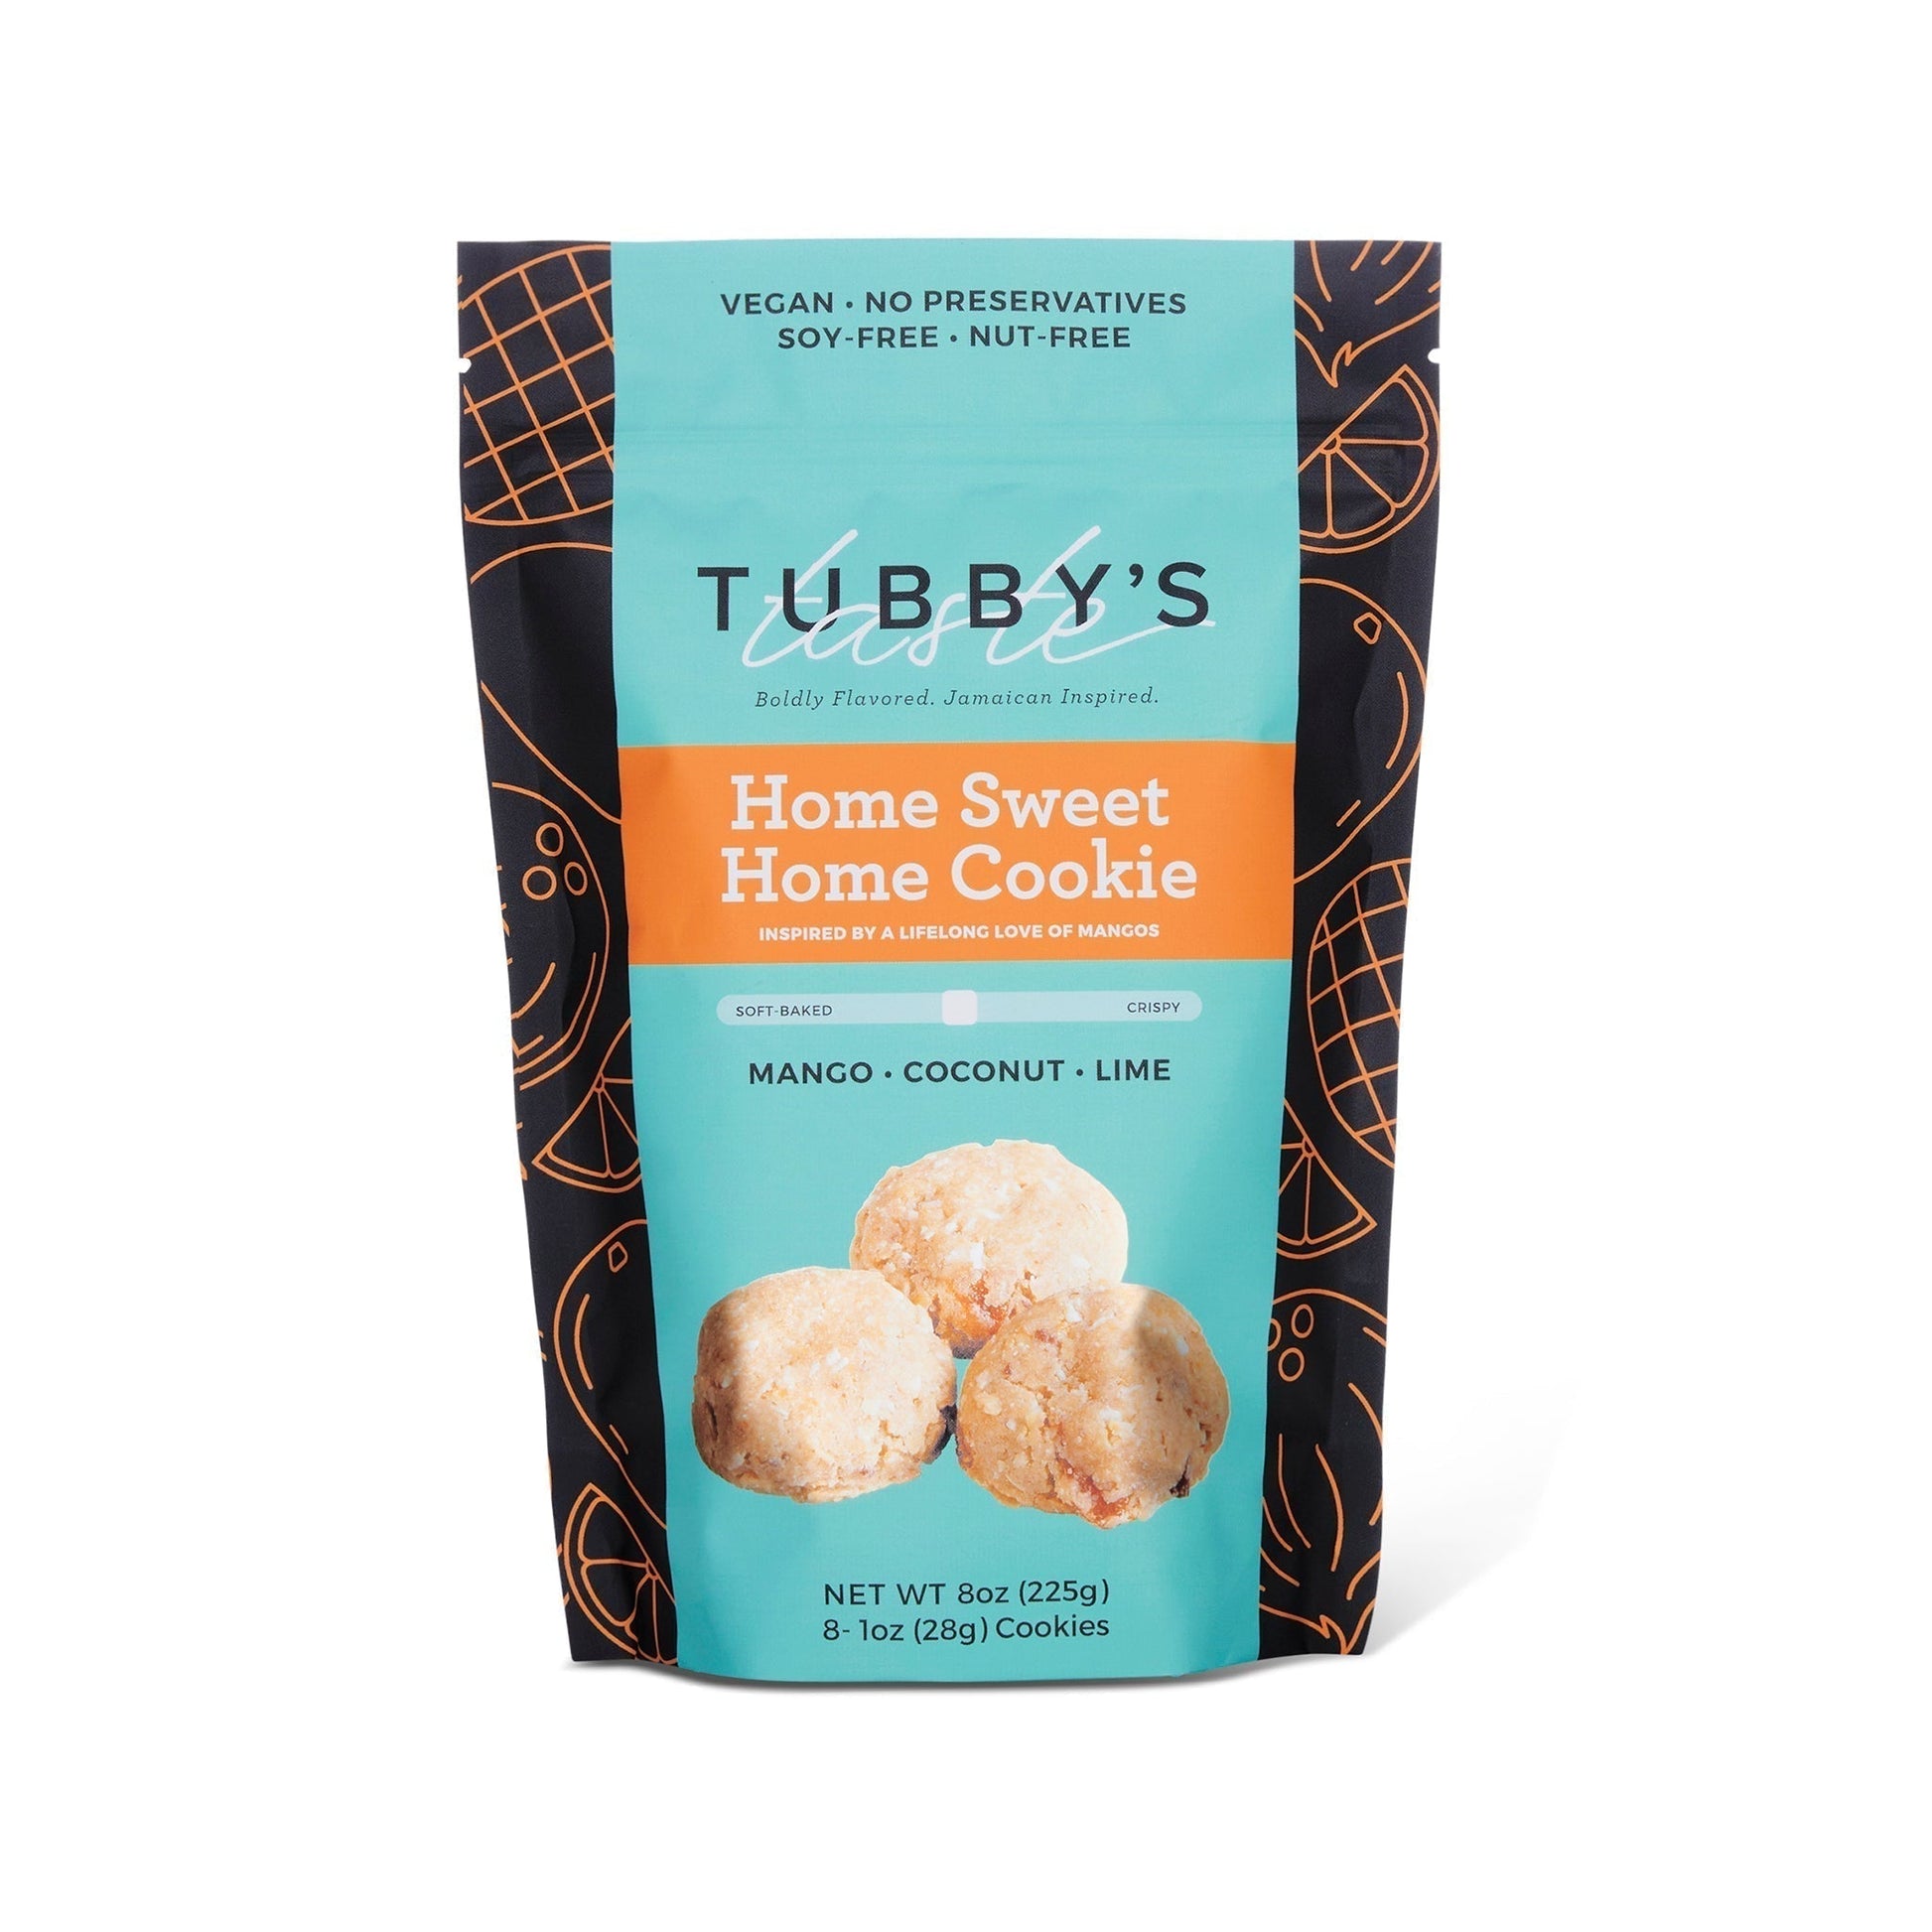 A bag of Tubby's Taste Mango Coconut Lime cookies labeled Home Sweet Home on a white background.